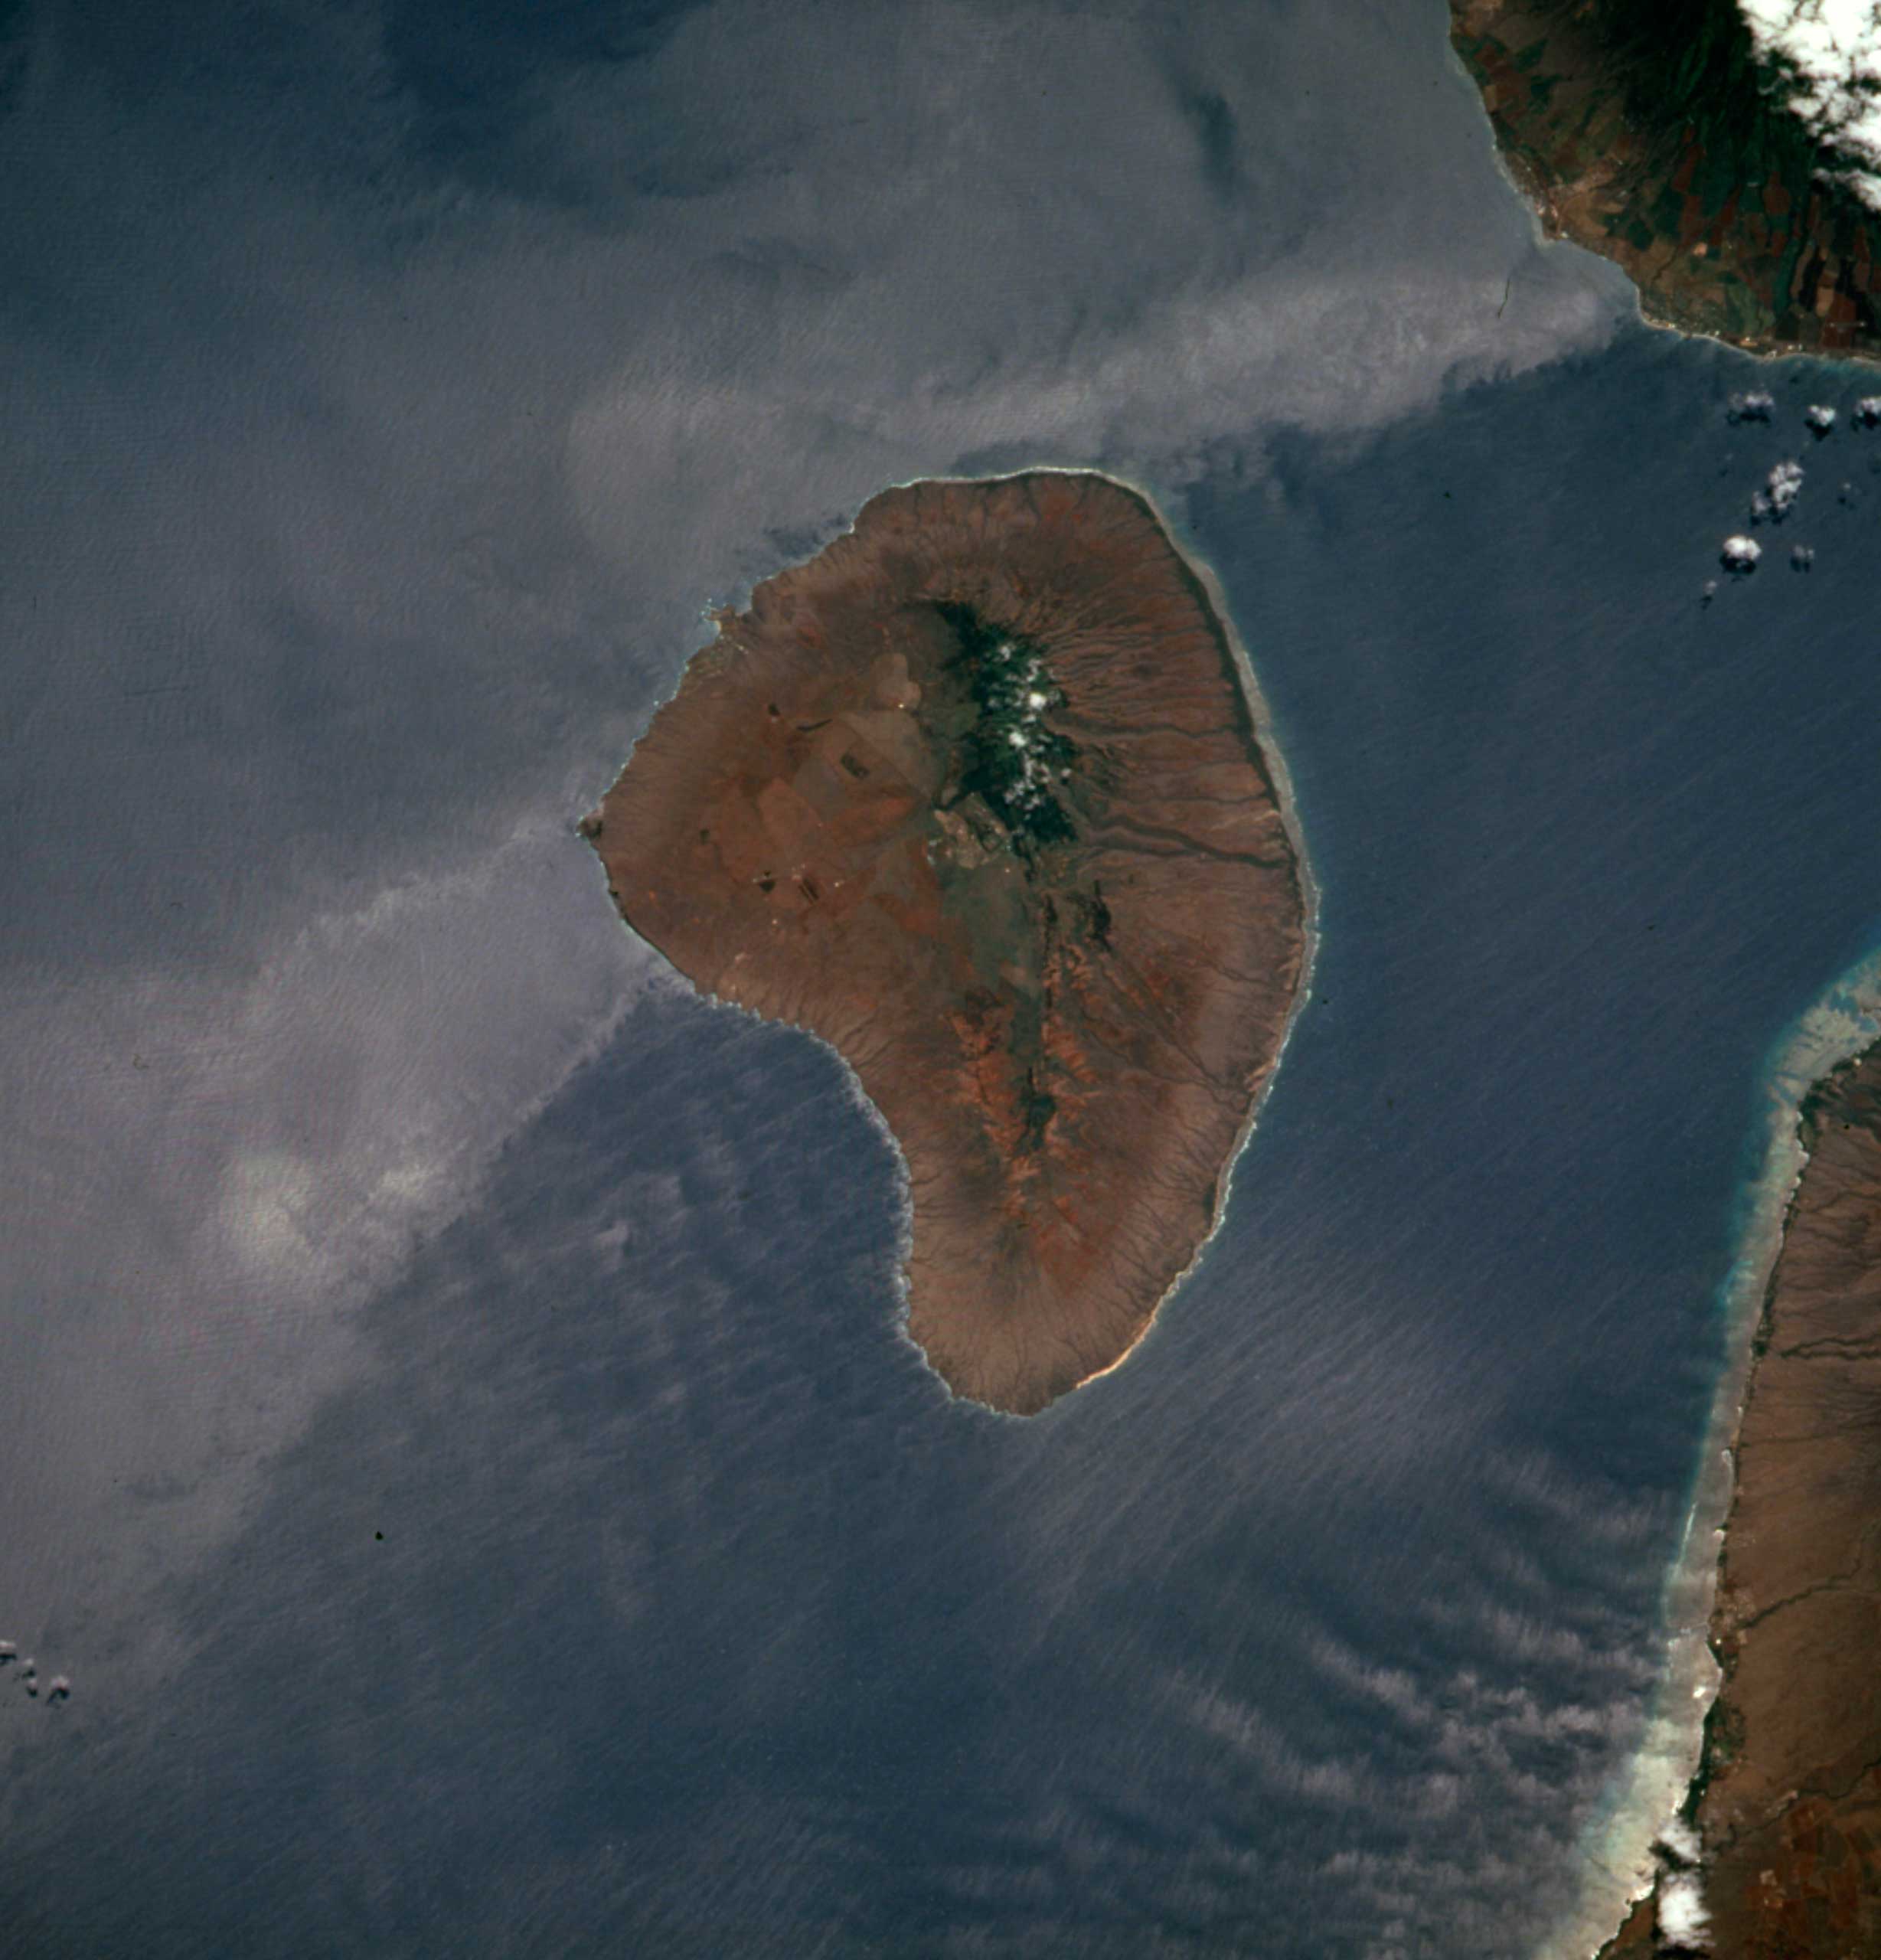 Larry Ellison
                              
                              Outgoing Oracle CEO Larry Ellison owns 98% of the 141-square-mile Hawaiian island of Lanai, which he bought for an undisclosed price. He is turning it into a  model for sustainable enterprise,  he's said, though details remain sketchy.